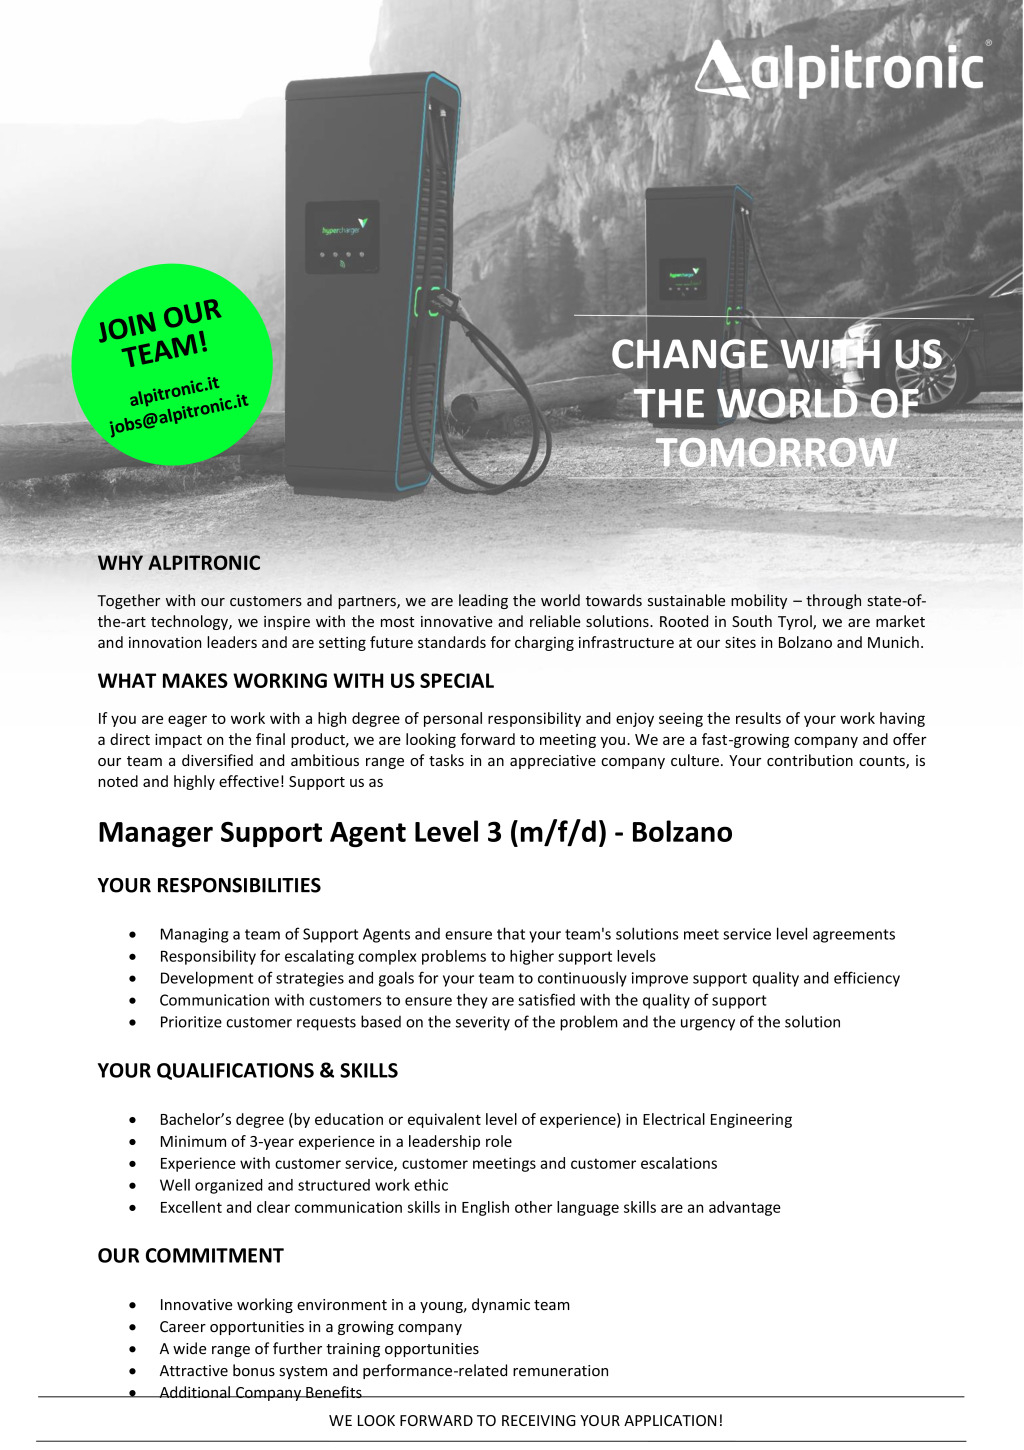 Manager Support Agent Level 3 (m/f/d)